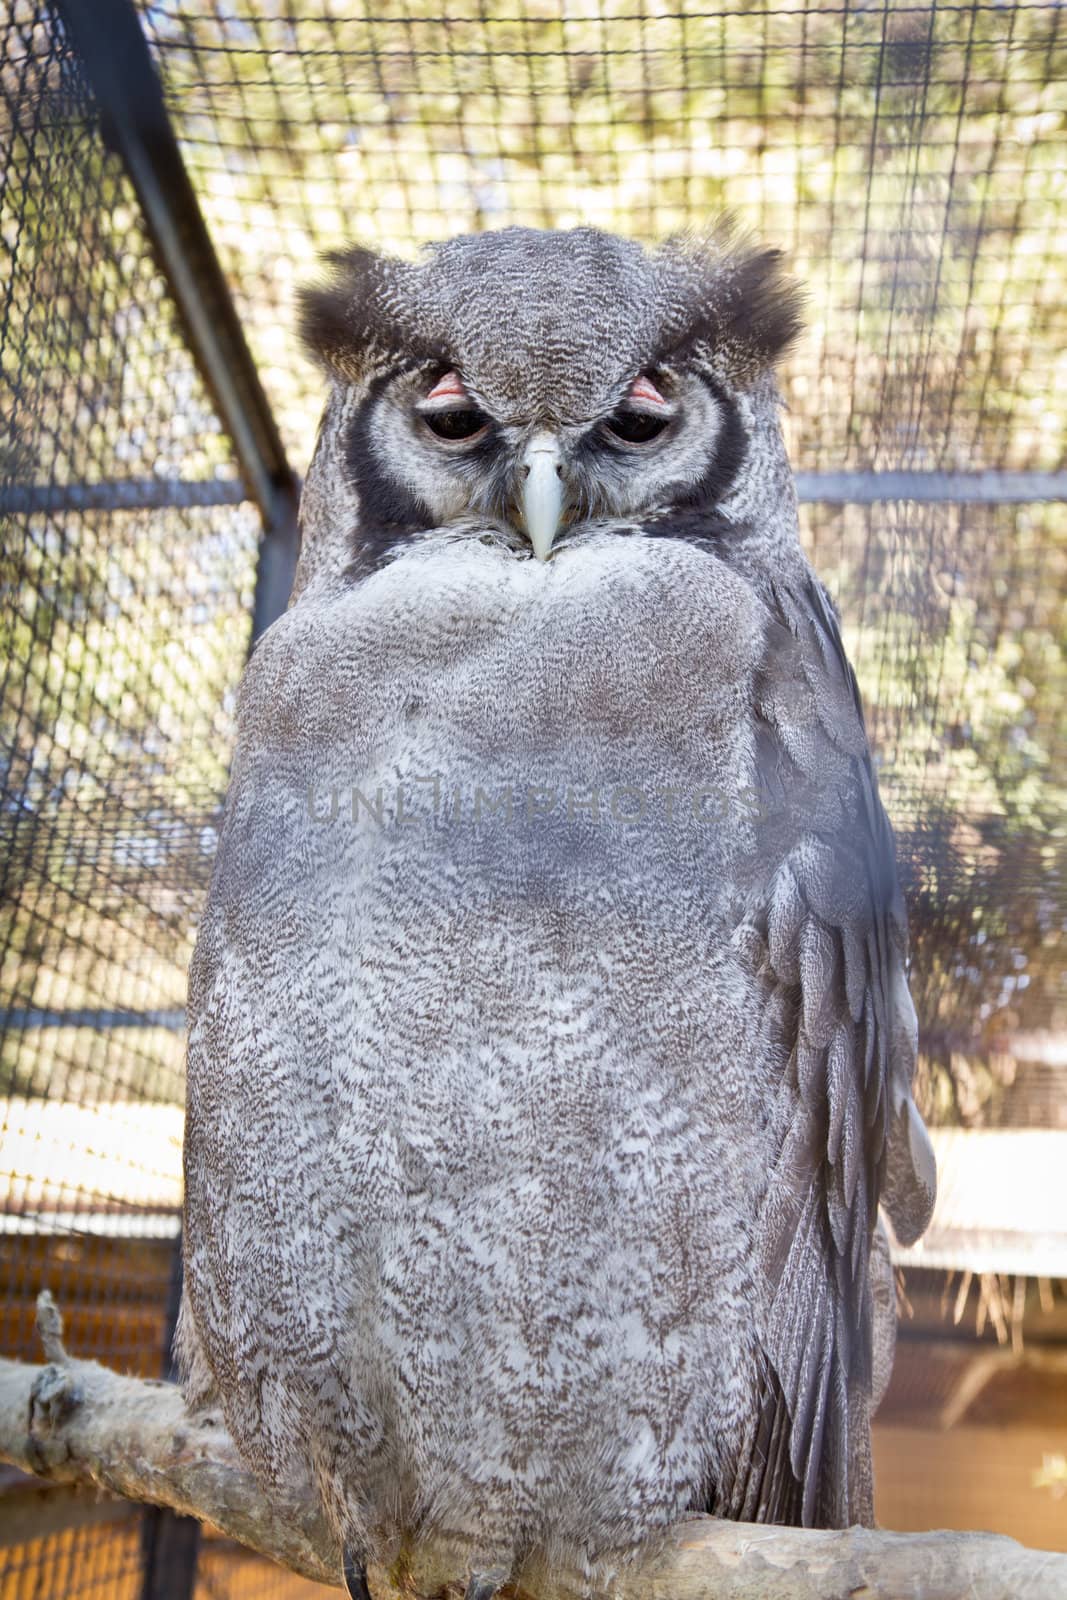 Verraux’s Eagle-Owl, also known as Giant or Milky Eagle Owl with a wing span of over a meter and a half